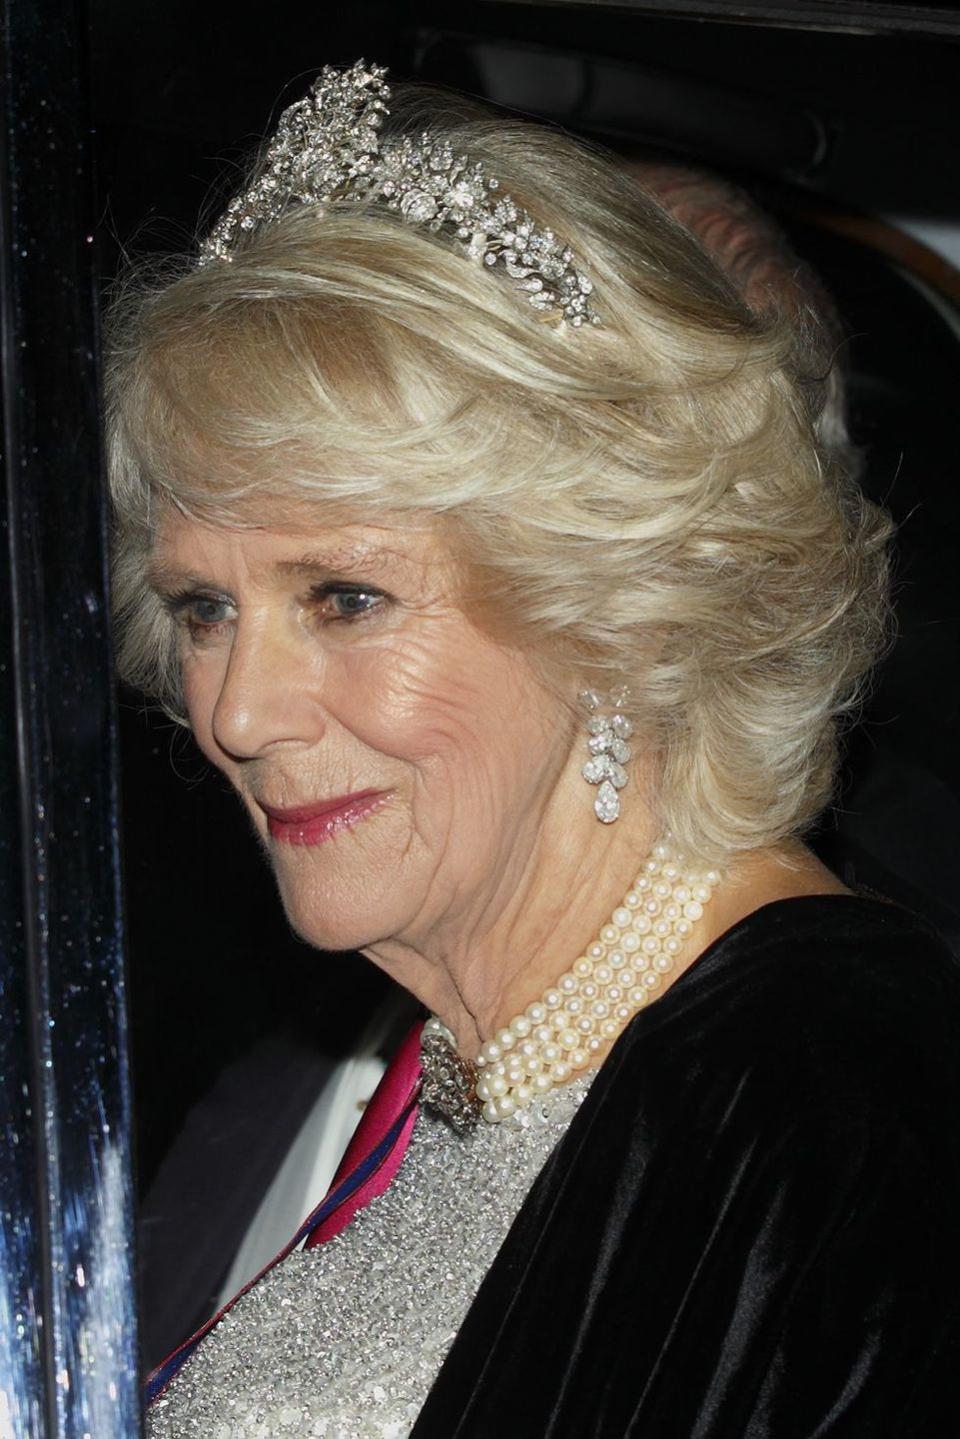 <p>Camilla also chose to wear the Cubitt Tiara to the annual diplomatic reception at Buckingham Palace in 2014. It paired well with her sparkly dress and other pieces of diamond jewelry.<br></p>